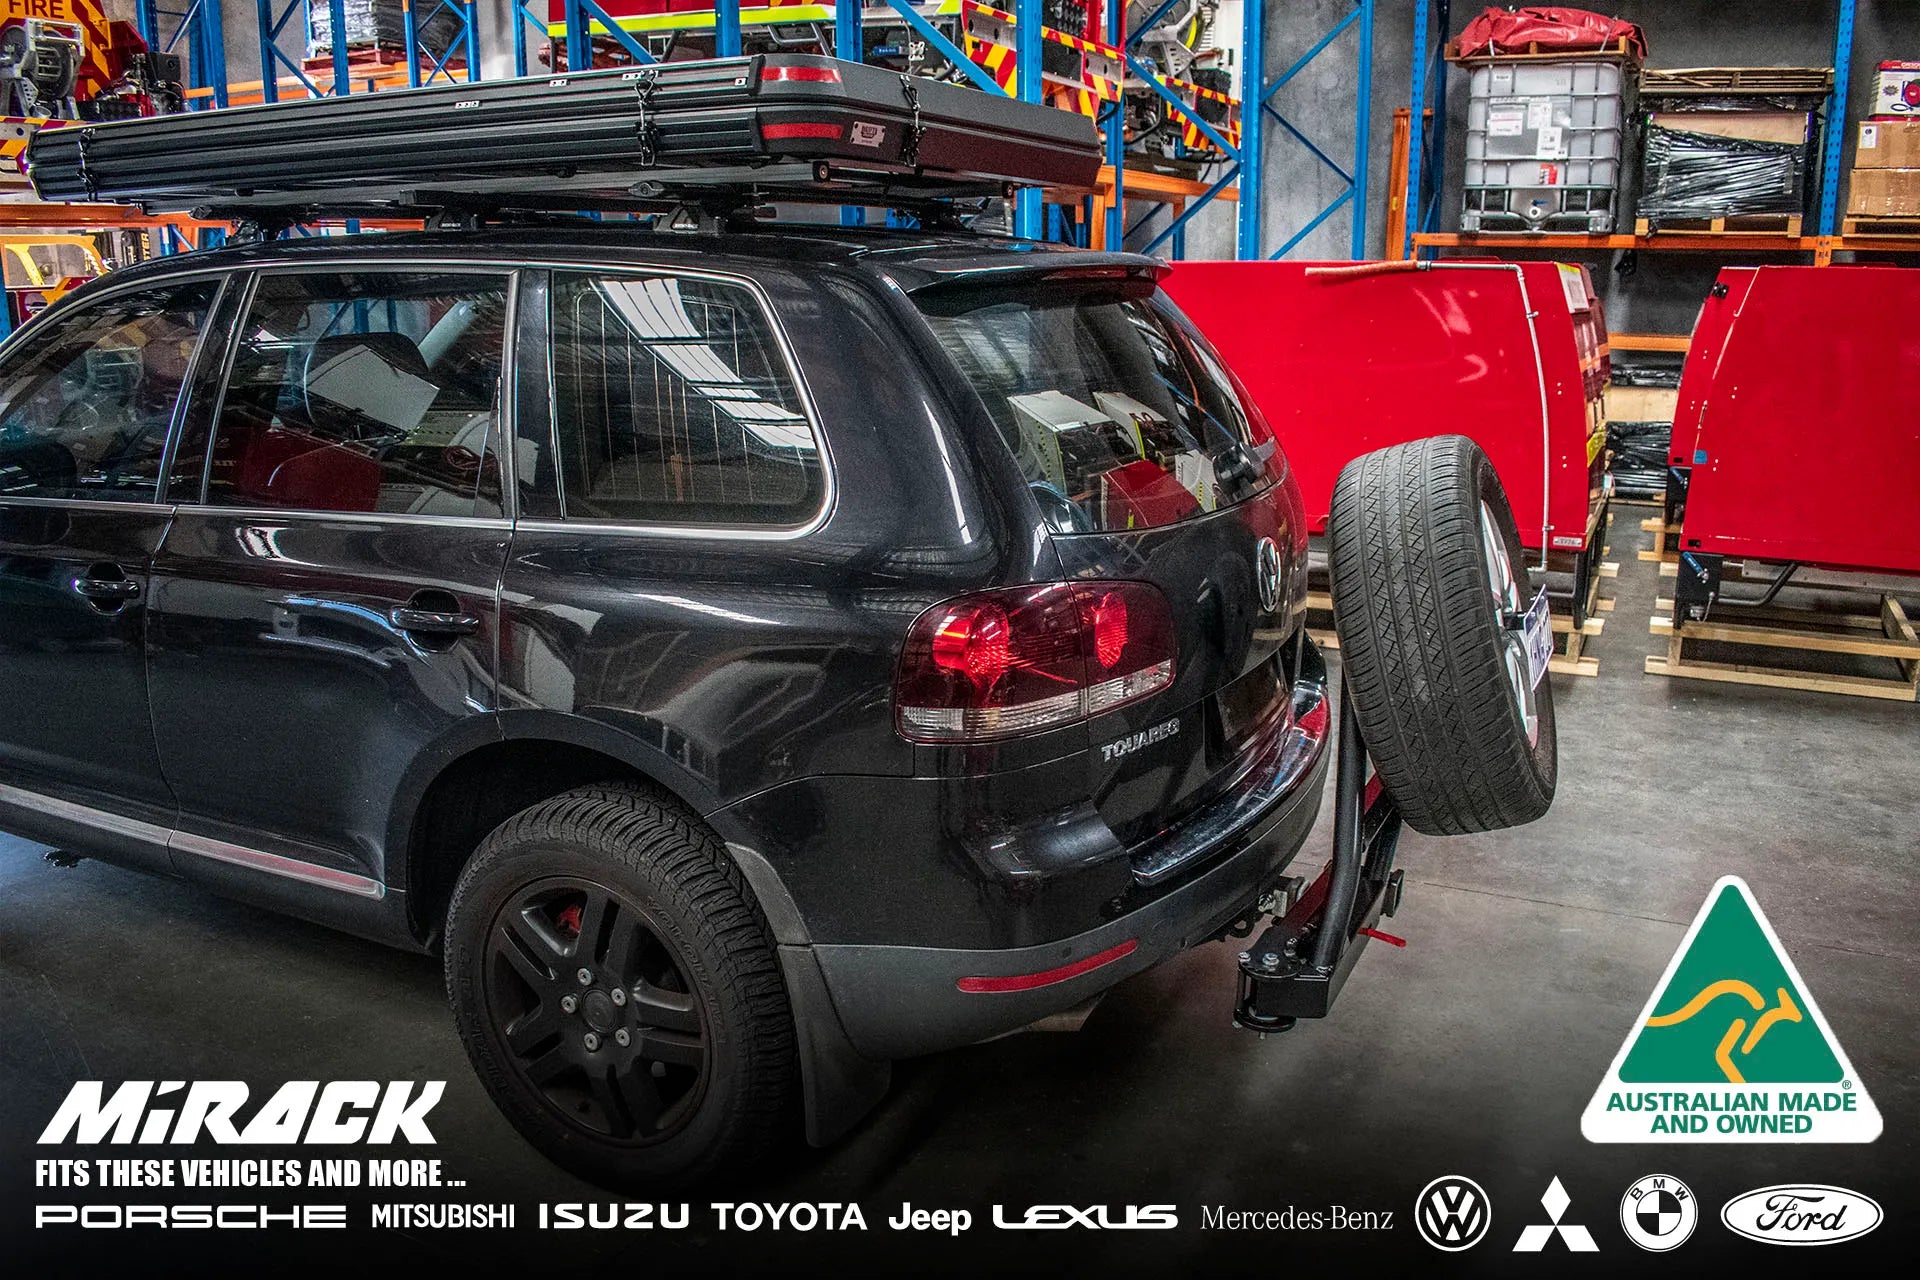 Open up adventure possibilities for your VW Touareg: Mirack's swinging spare wheel carrier on the tow hitch provides easy access and frees up rear cargo space.